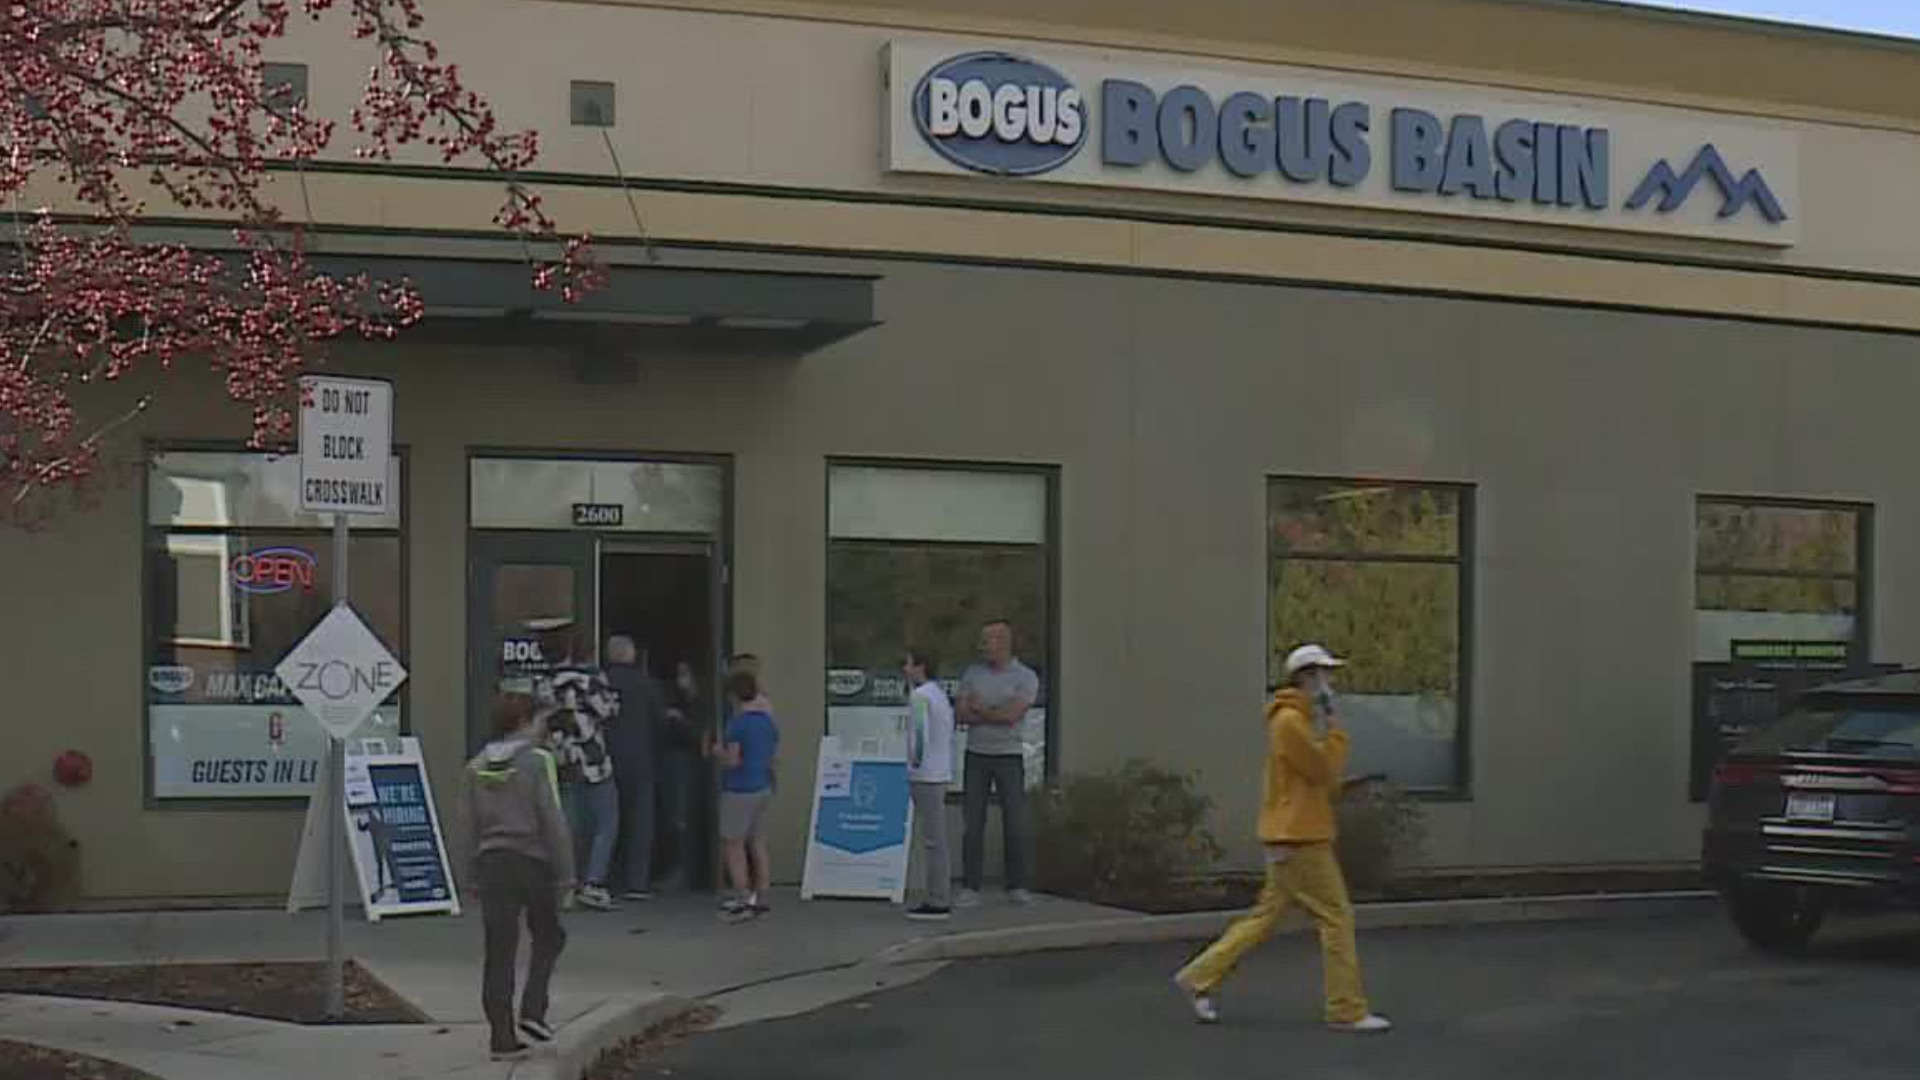 Bogus Basin is looking for employees for the 2021-2022 winter season.